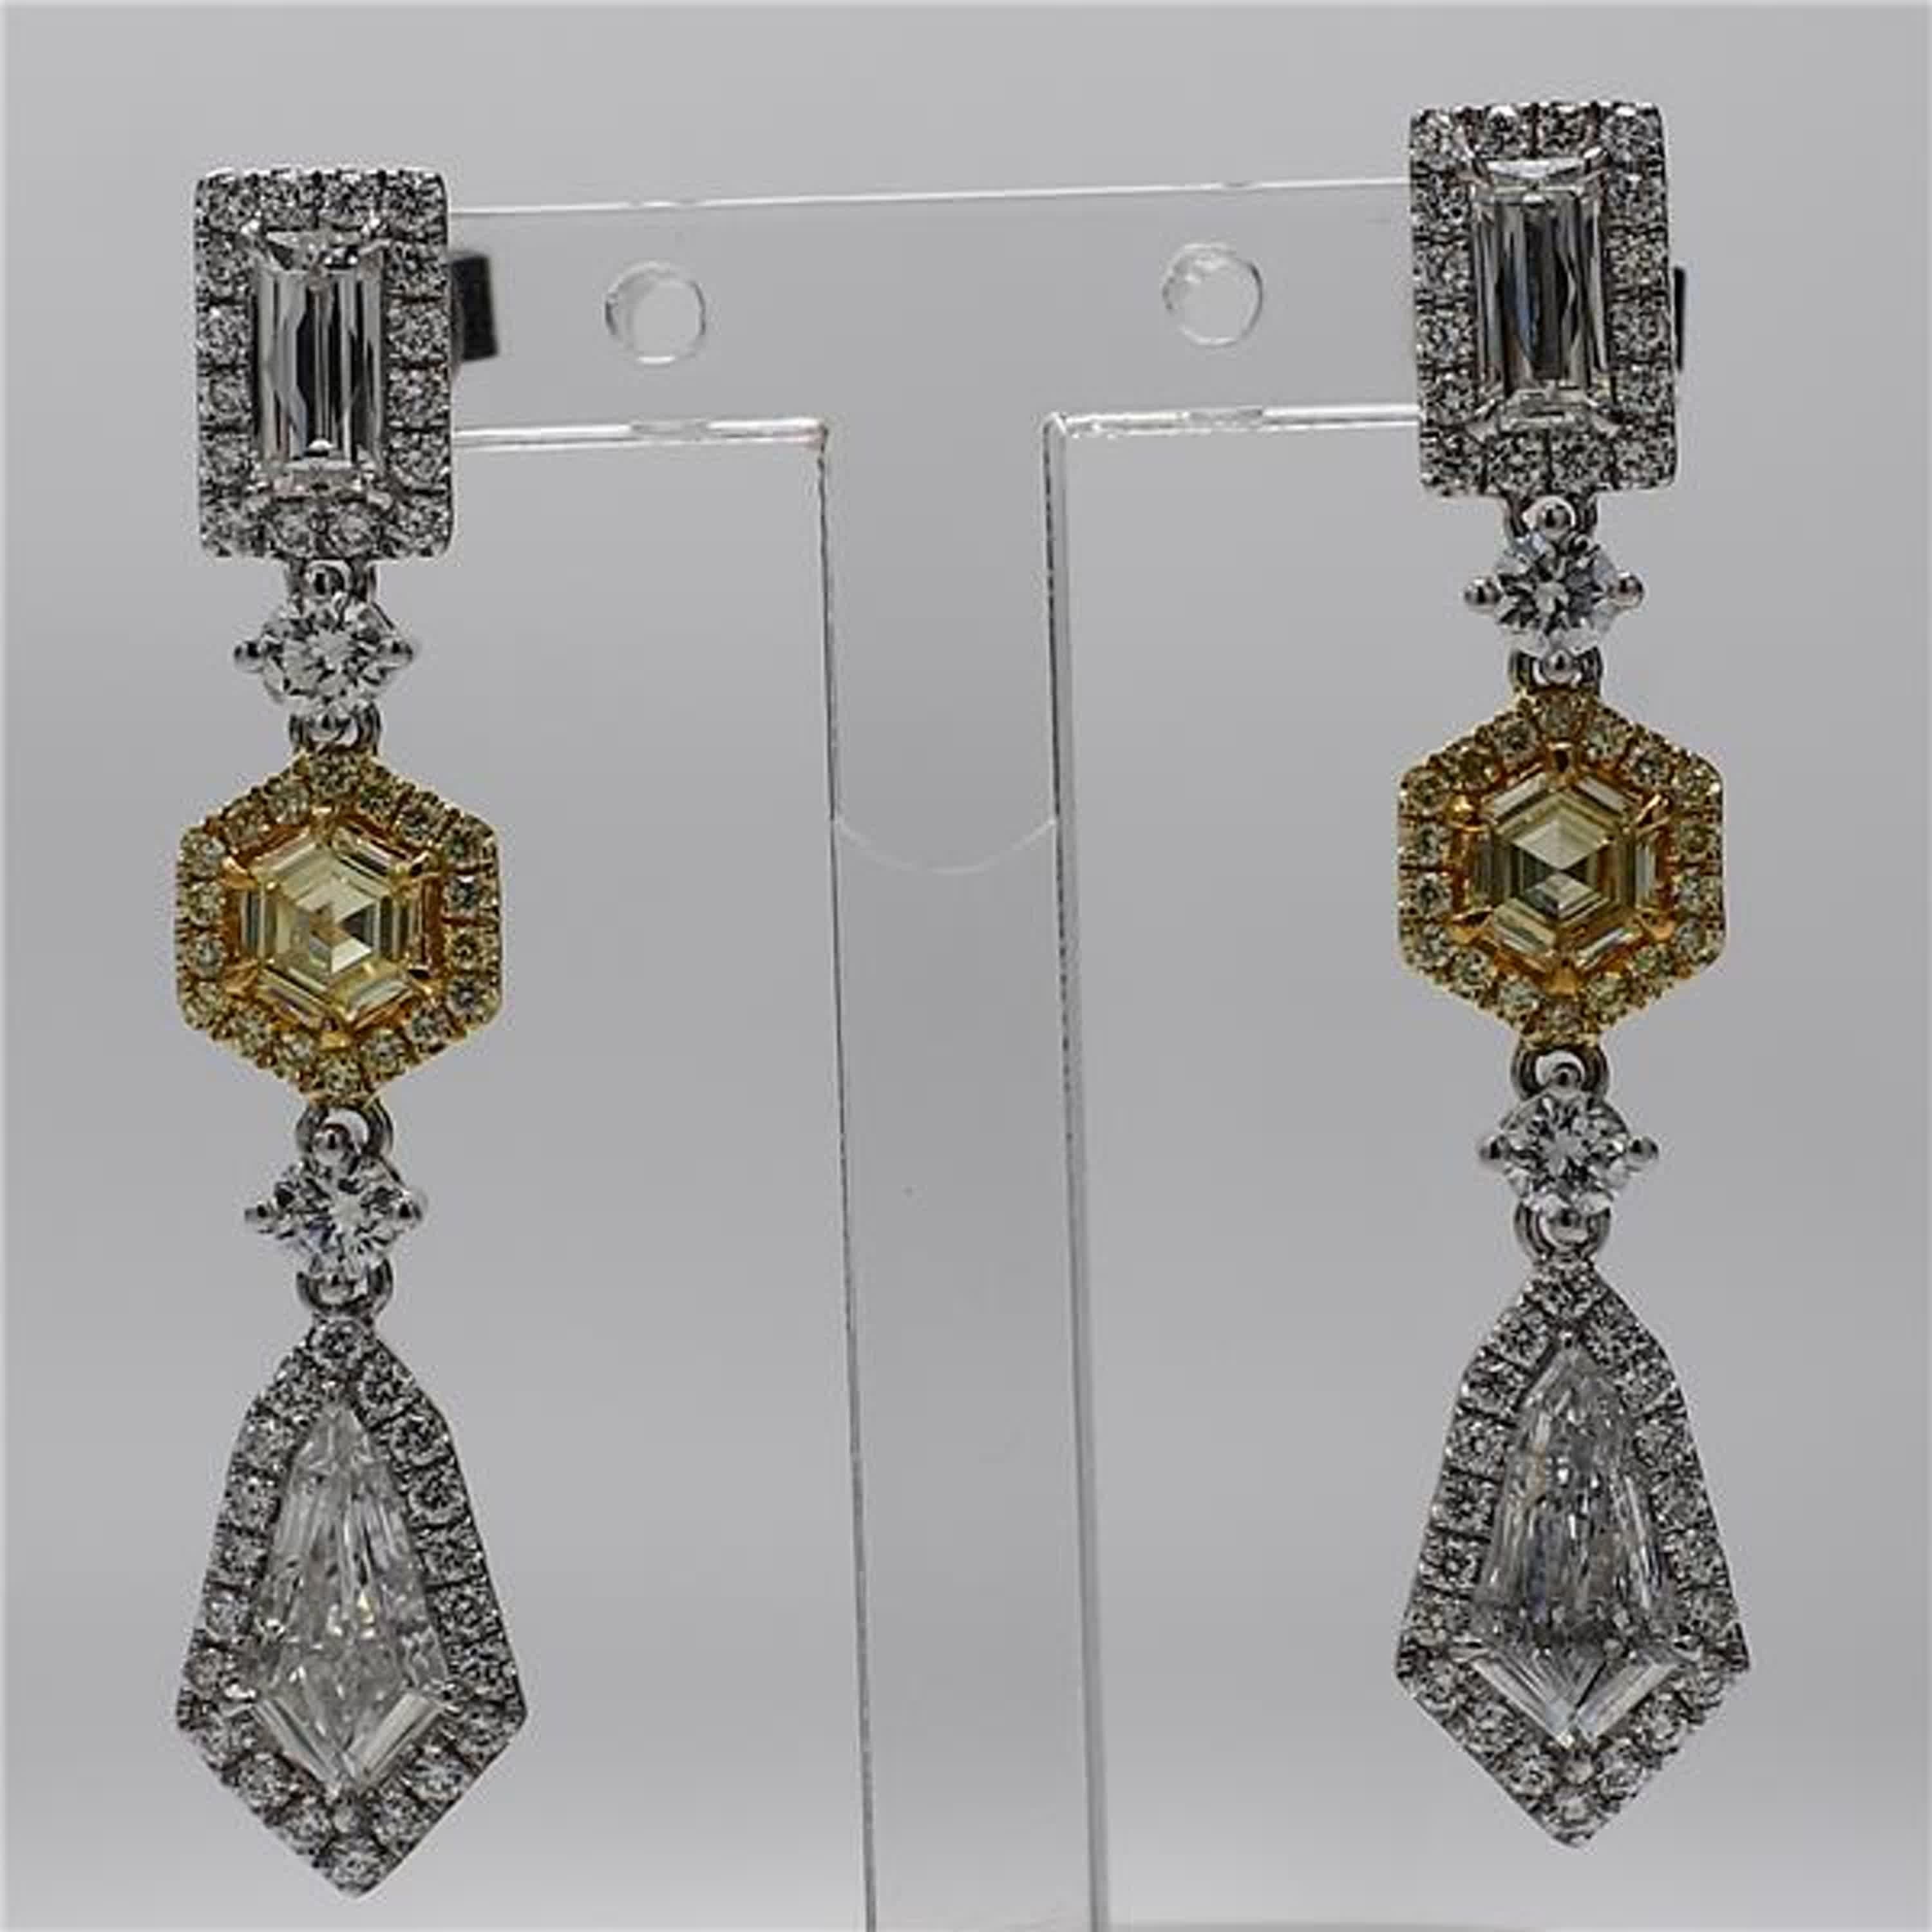 RareGemWorld's intriguing GIA certified diamond earrings. Mounted in a beautiful 18K Yellow and White Gold setting with natural yellow hexagon cut diamonds, white kite cut diamonds, and white baguette cut diamonds, all surrounded by natural round